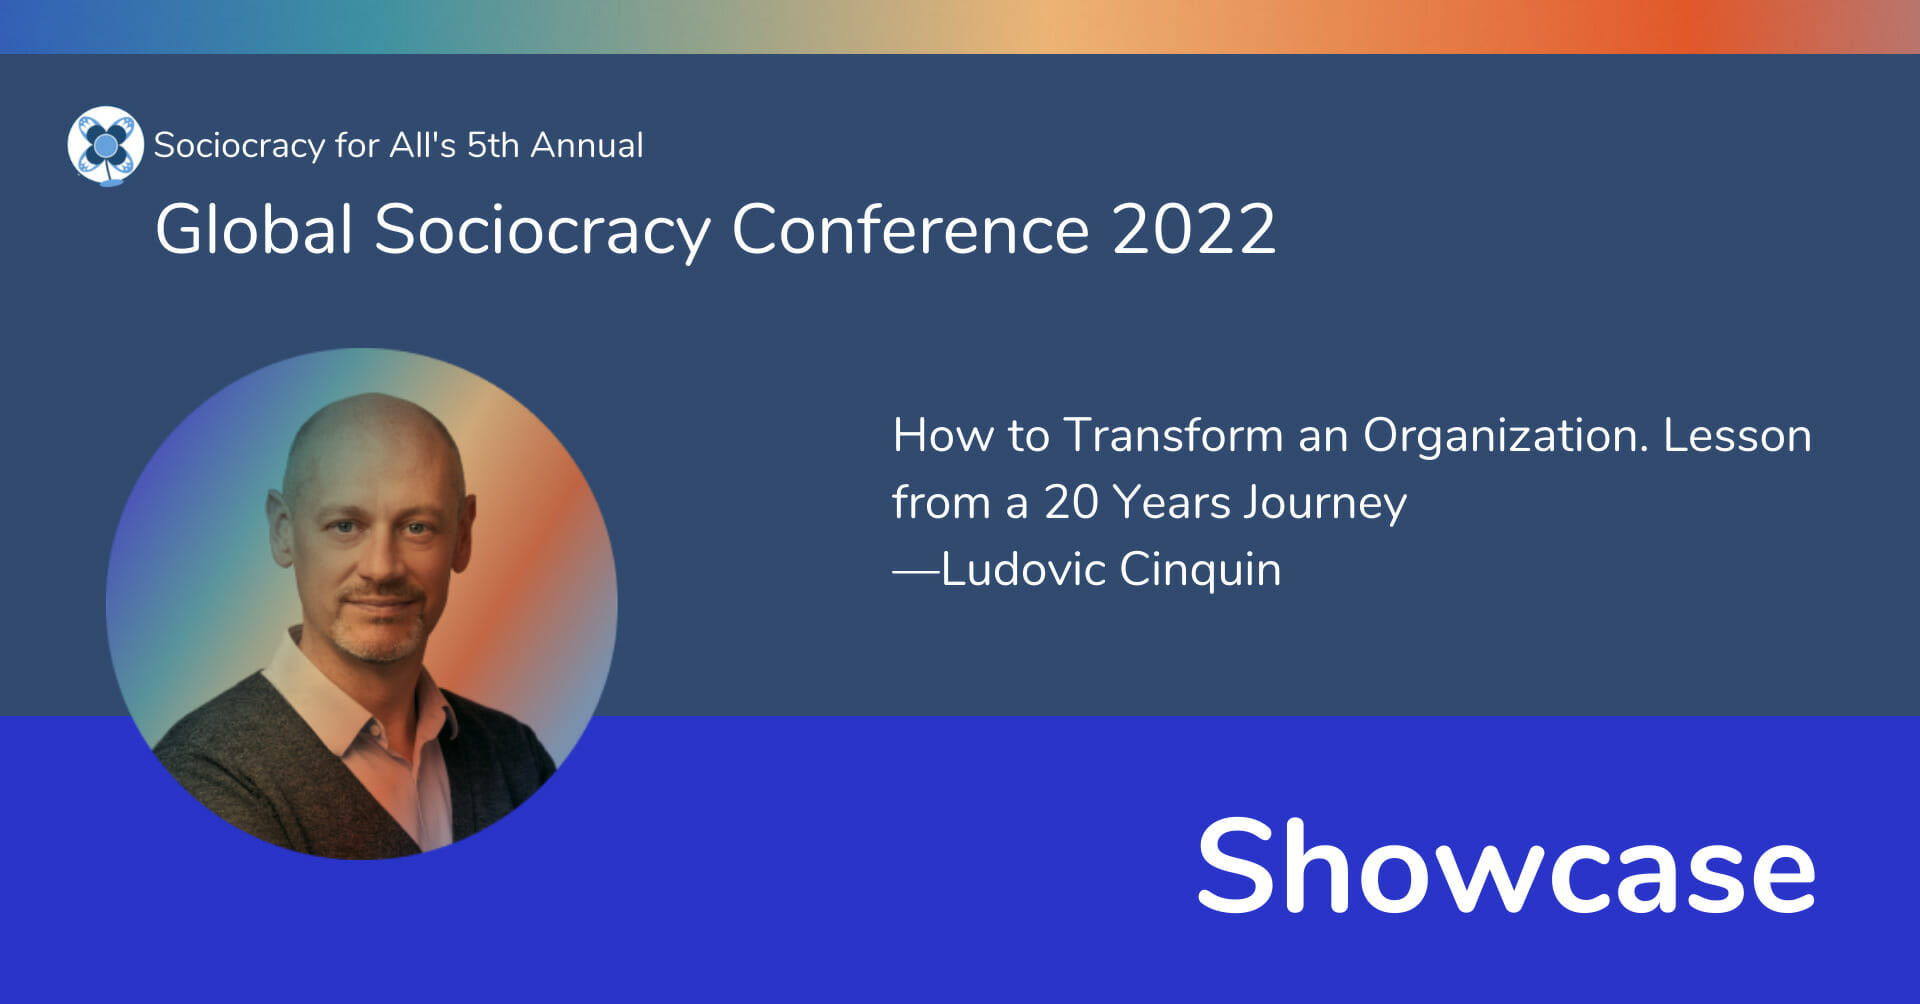 How to transform an organization. Lesson from a 20 years journey —Ludovic Cinquin